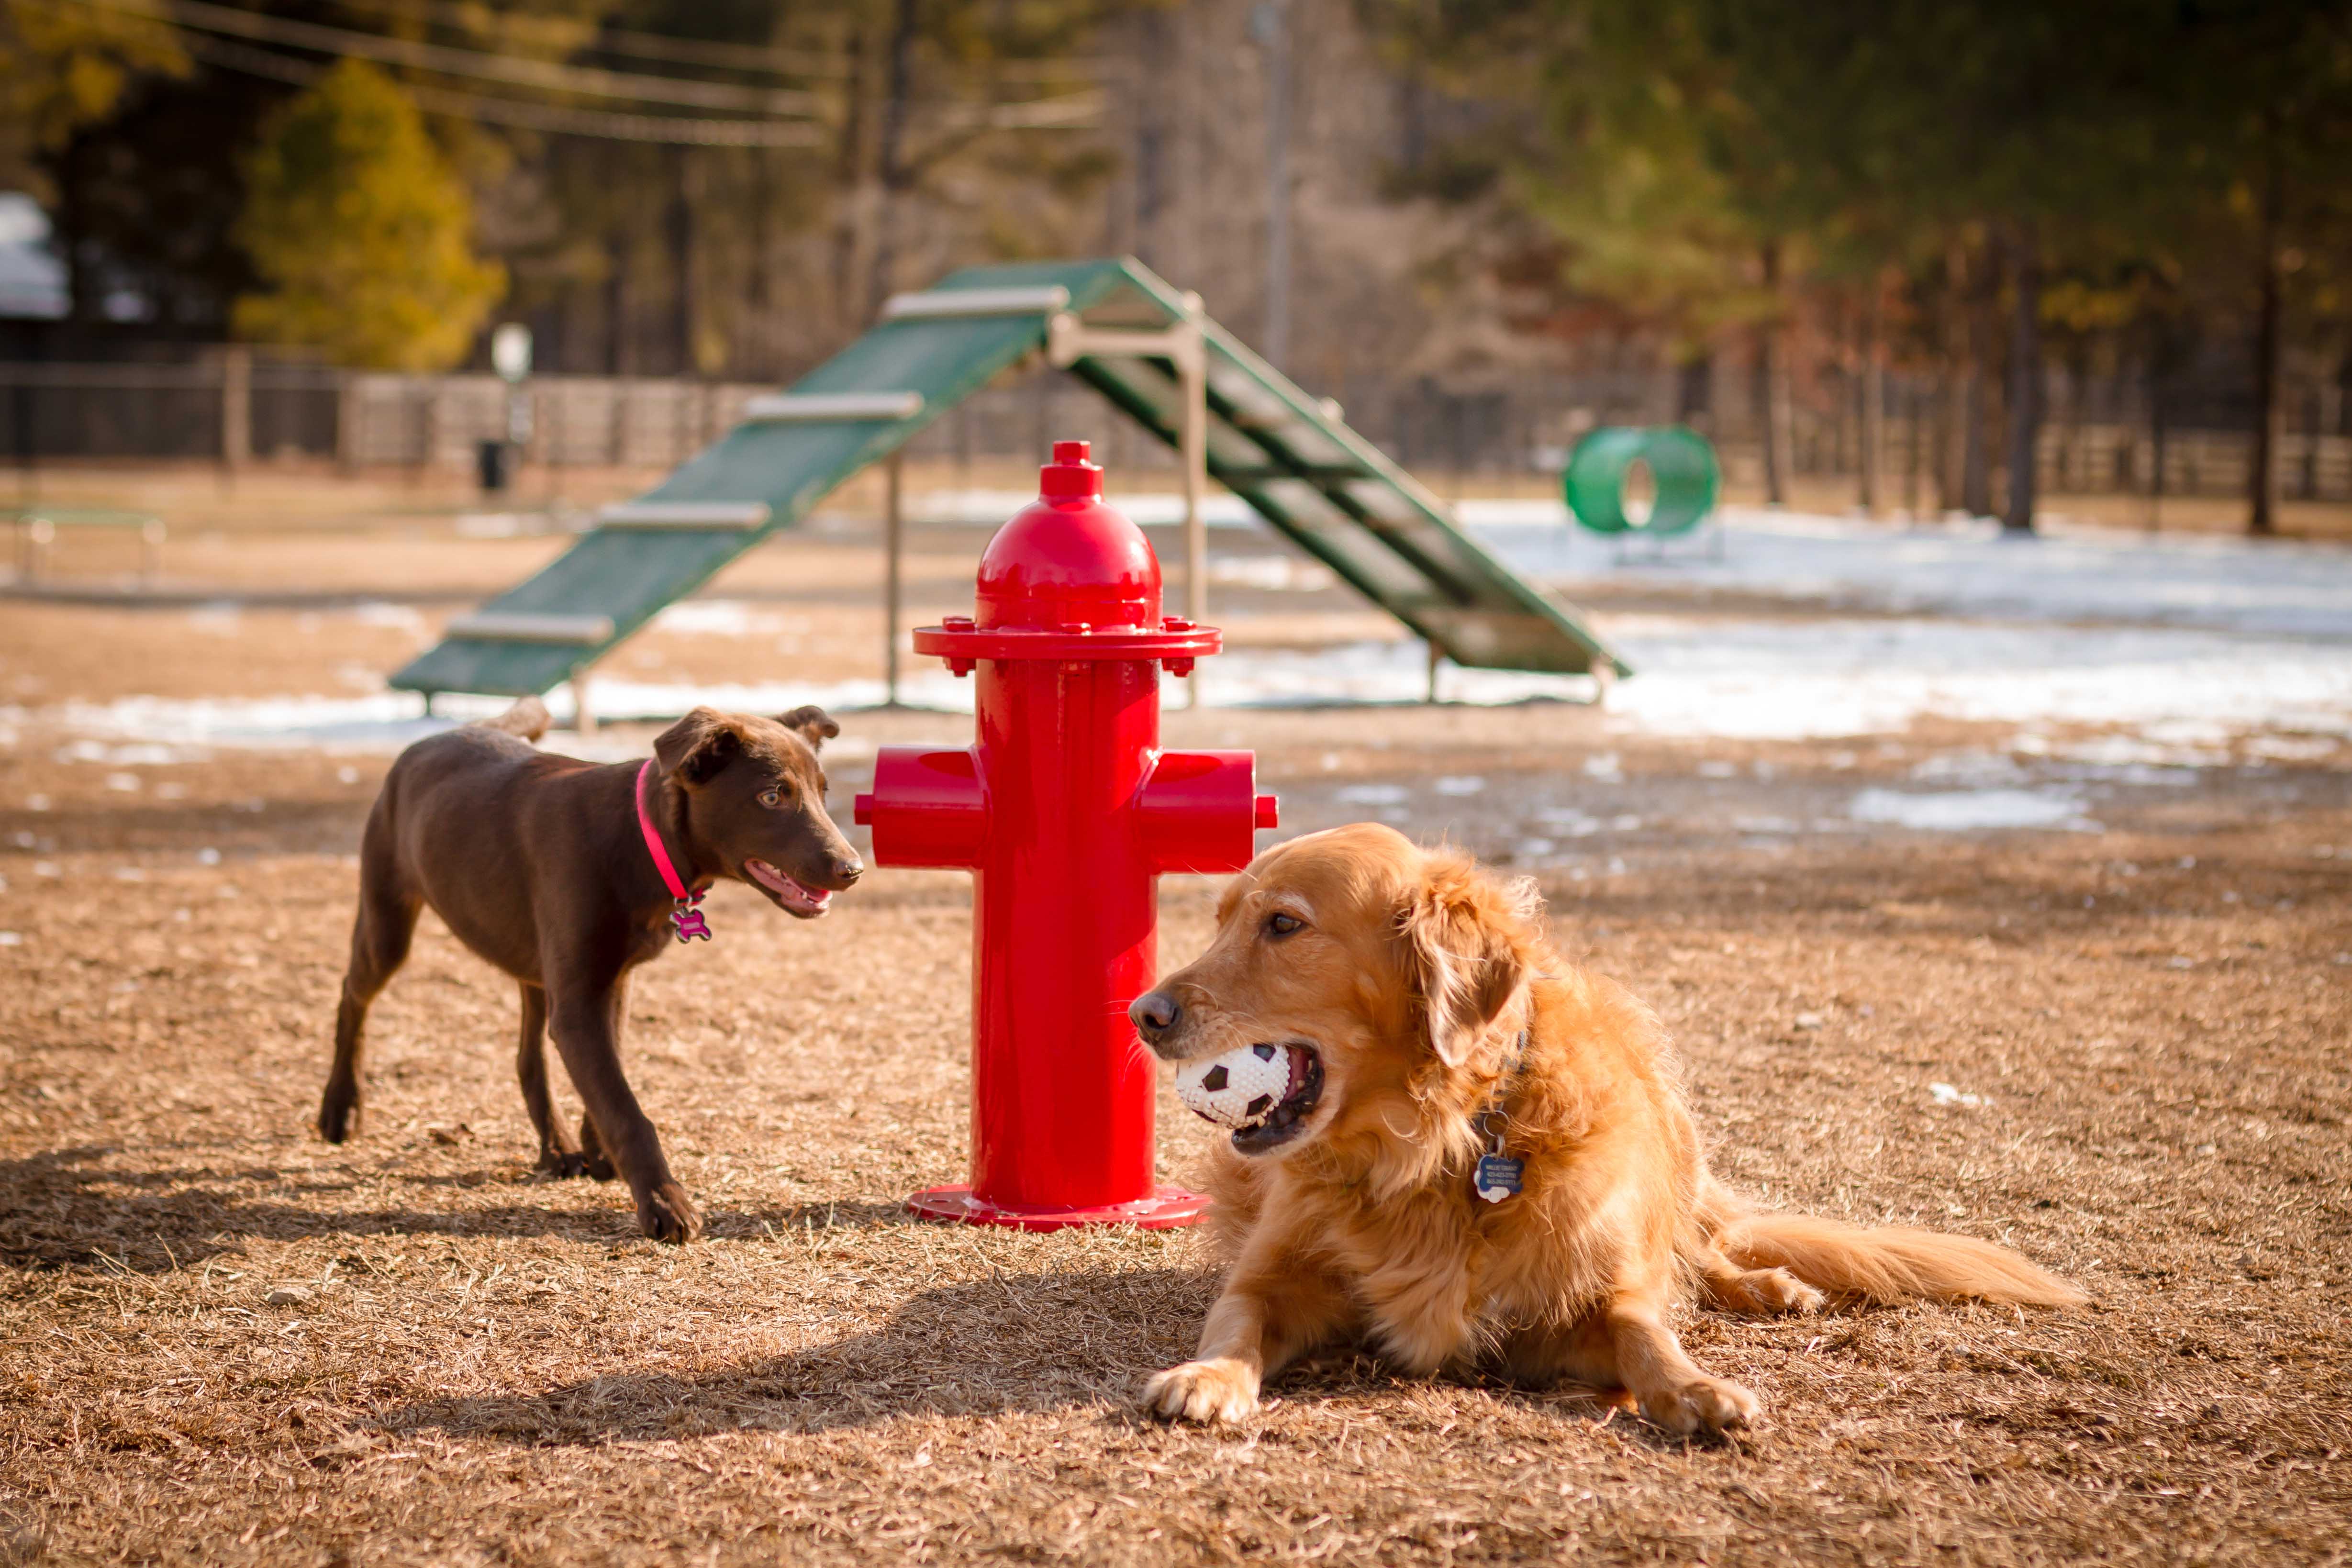 BarkPark by UltraSite Fire Hydrant